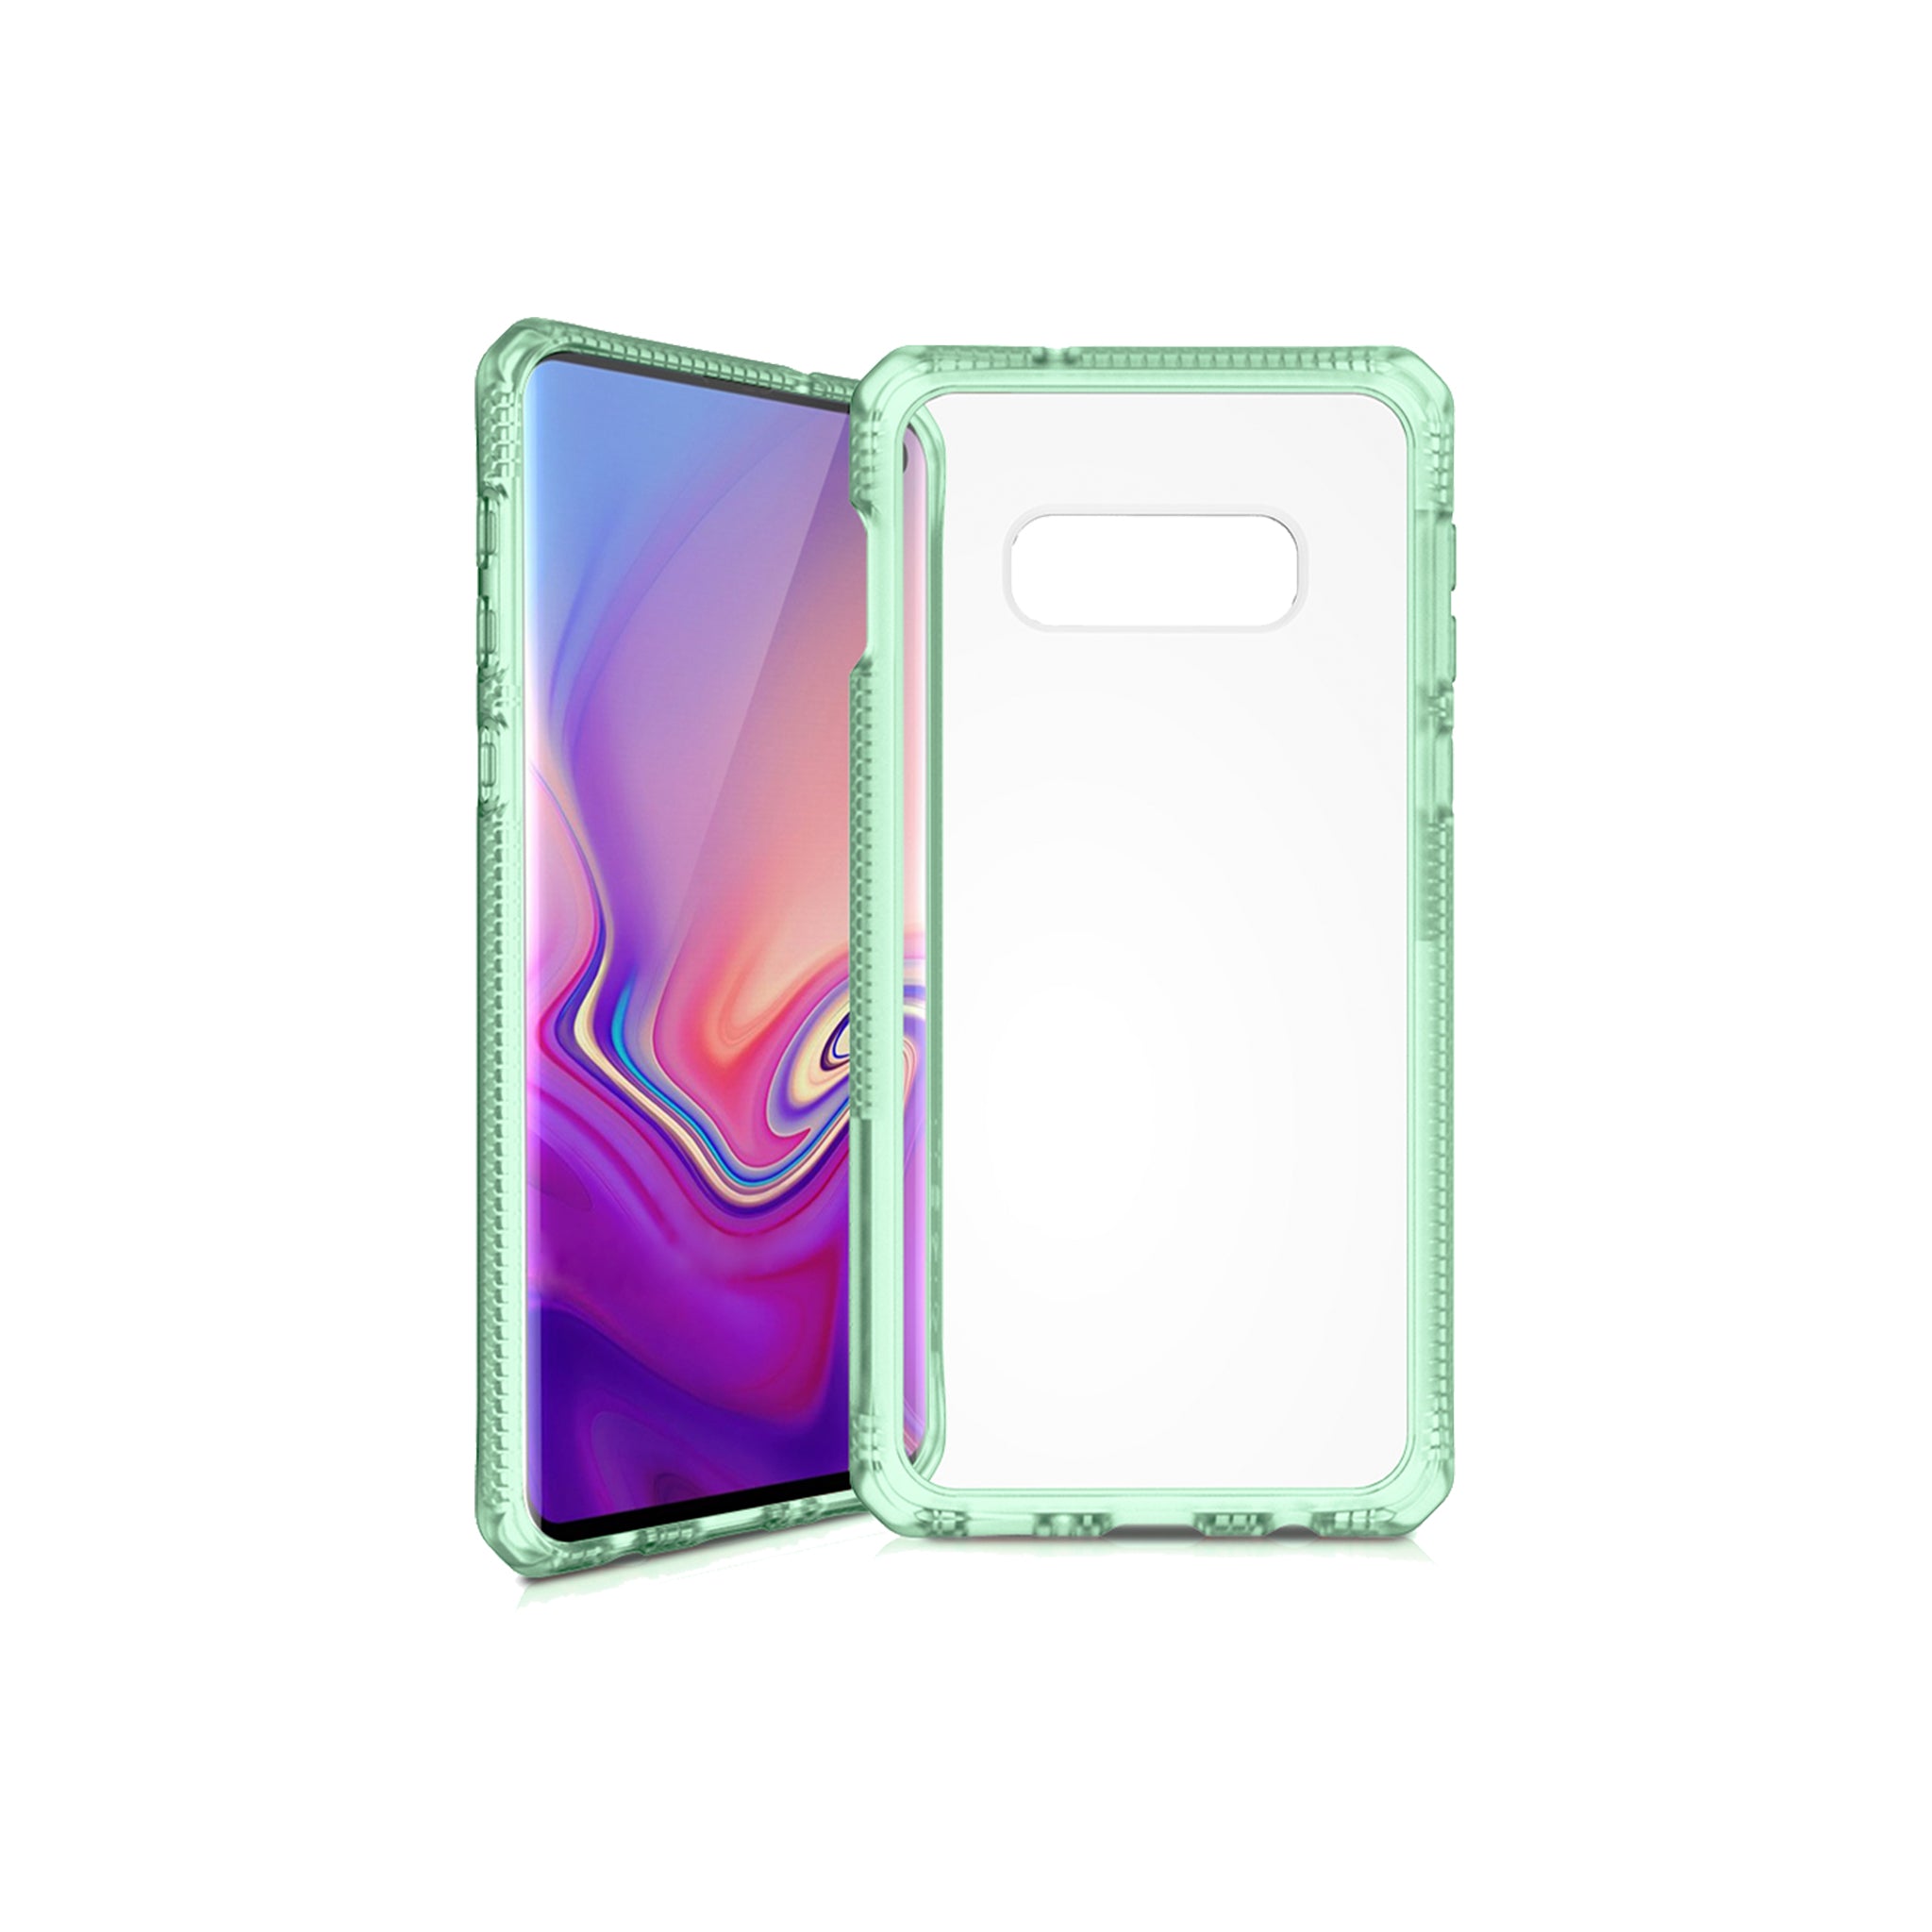 Itskins - Hybrid Frost Mkii Case For Samsung Galaxy S10e - Tiffany Green And Transparent